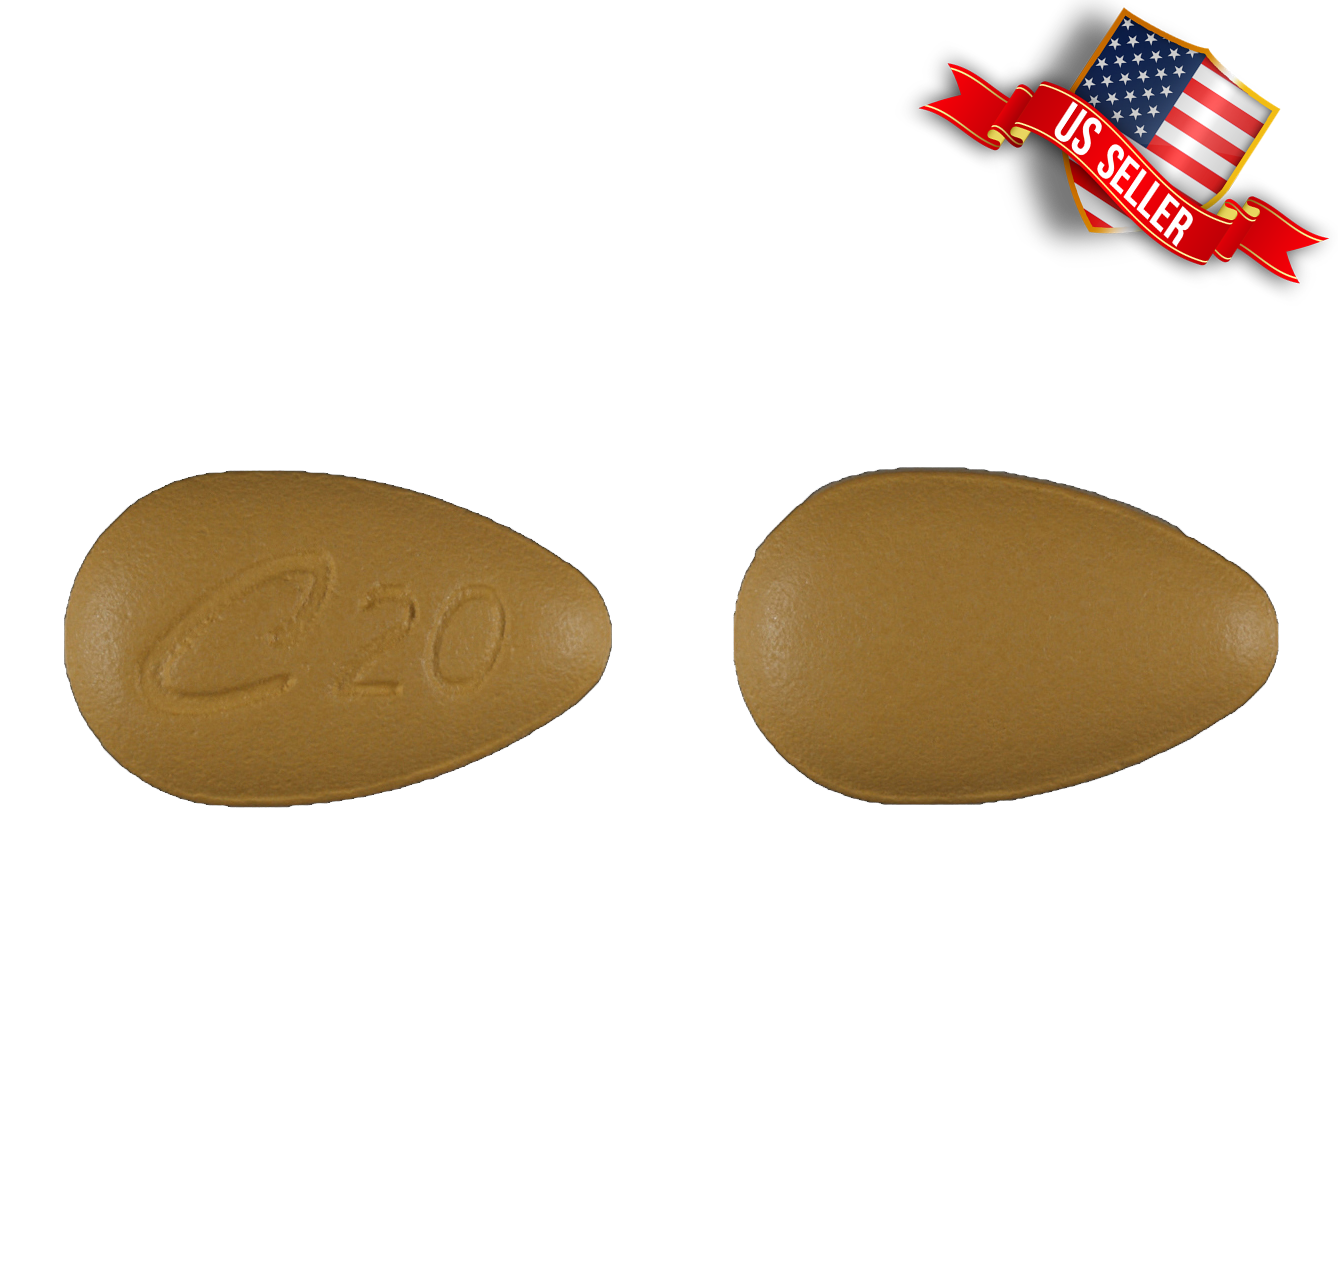 Buy Cialis 20mg in USA or Tadalafil 20mg Online from D-Pharmacy USA Seller